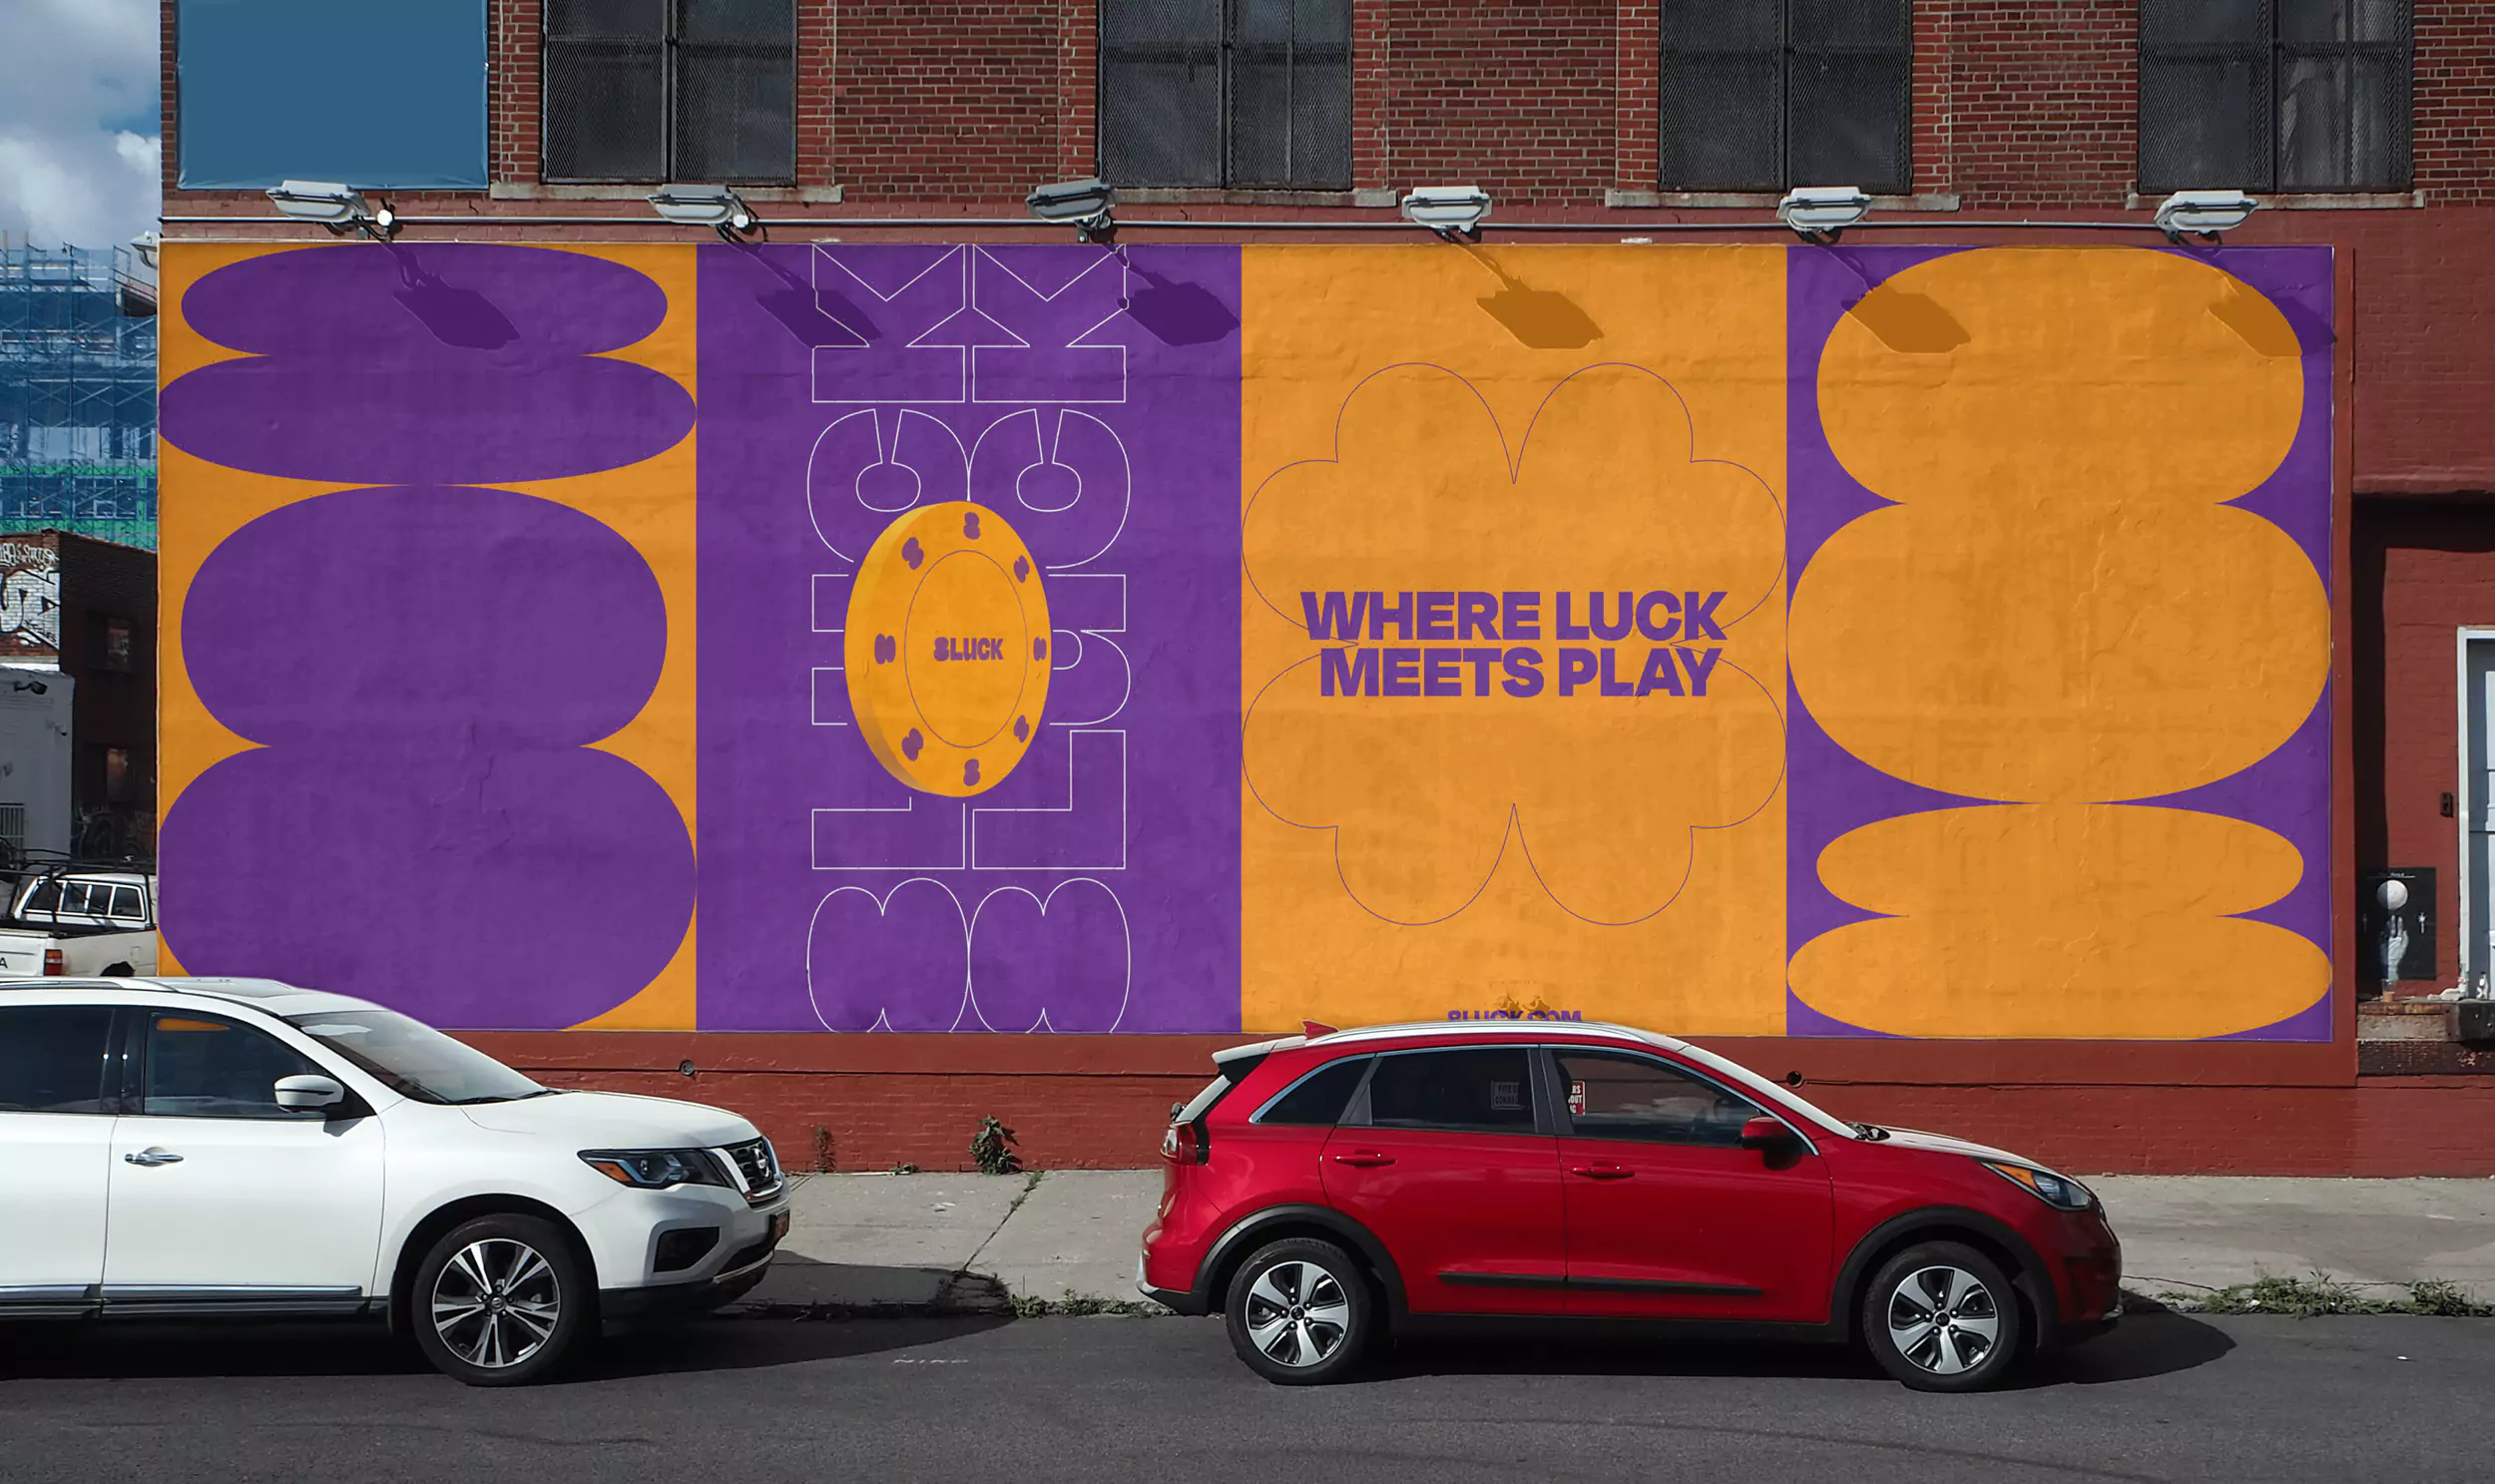 Visual Identity for 8luck - Poster Designs